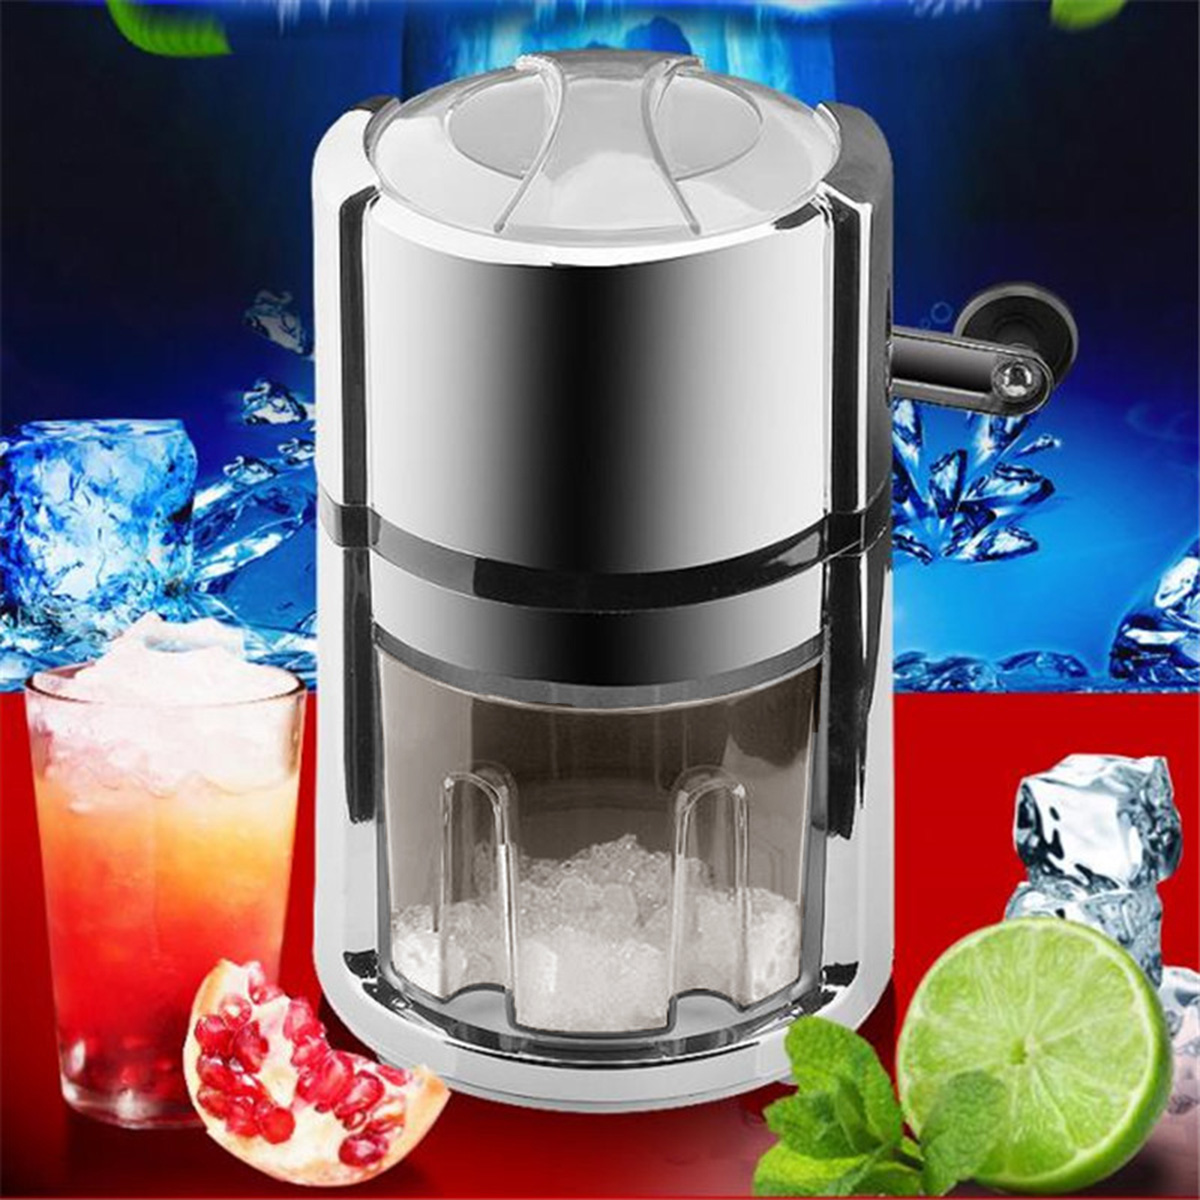 15L-Portable-Manual-Ice-Crusher-Ice-Maker-Snow-Cone-Machine-Ice-ShaverStainless-Steel-Ice-Cream-Scoo-1928427-11